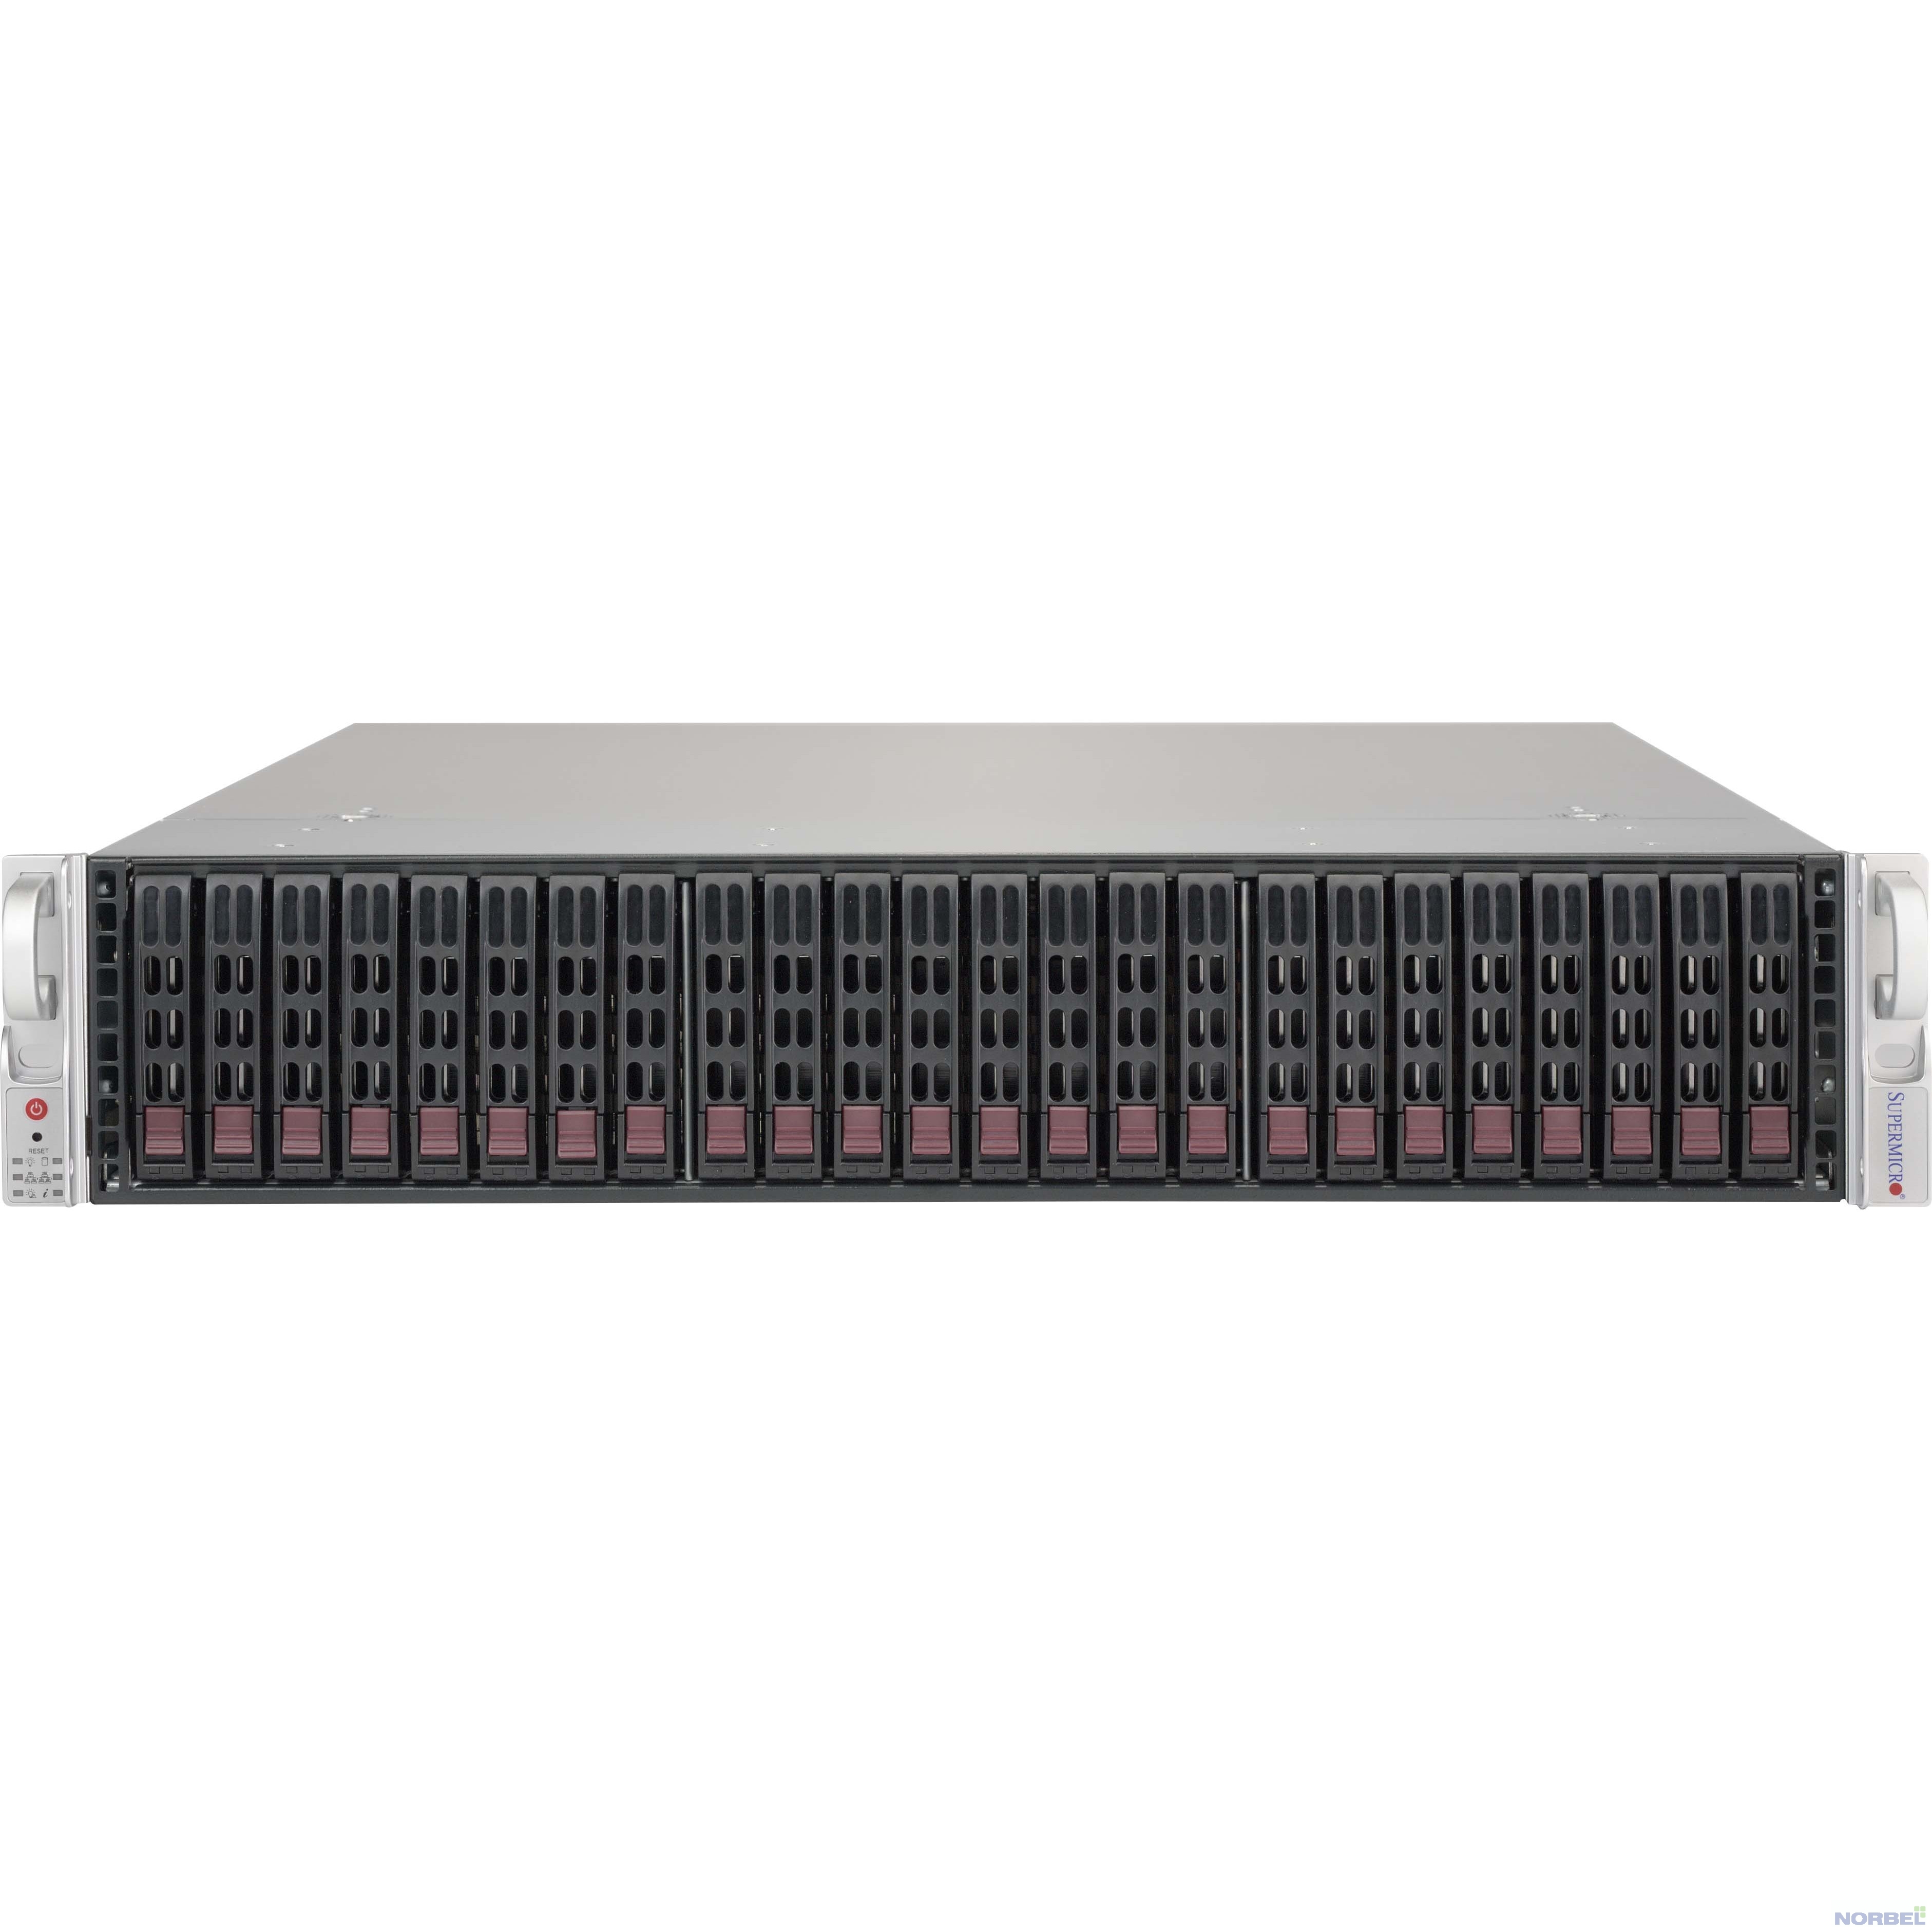 Supermicro Корпус CSE-216BE1C-R609JBOD 2U Storage JBOD Chassis with capacity 24 x 2.5&quot; hot-swappable HDDs bays, Single Expander Backplane Boards support SAS3 2 or SATA3 HDDs with 12Gb s throughput,